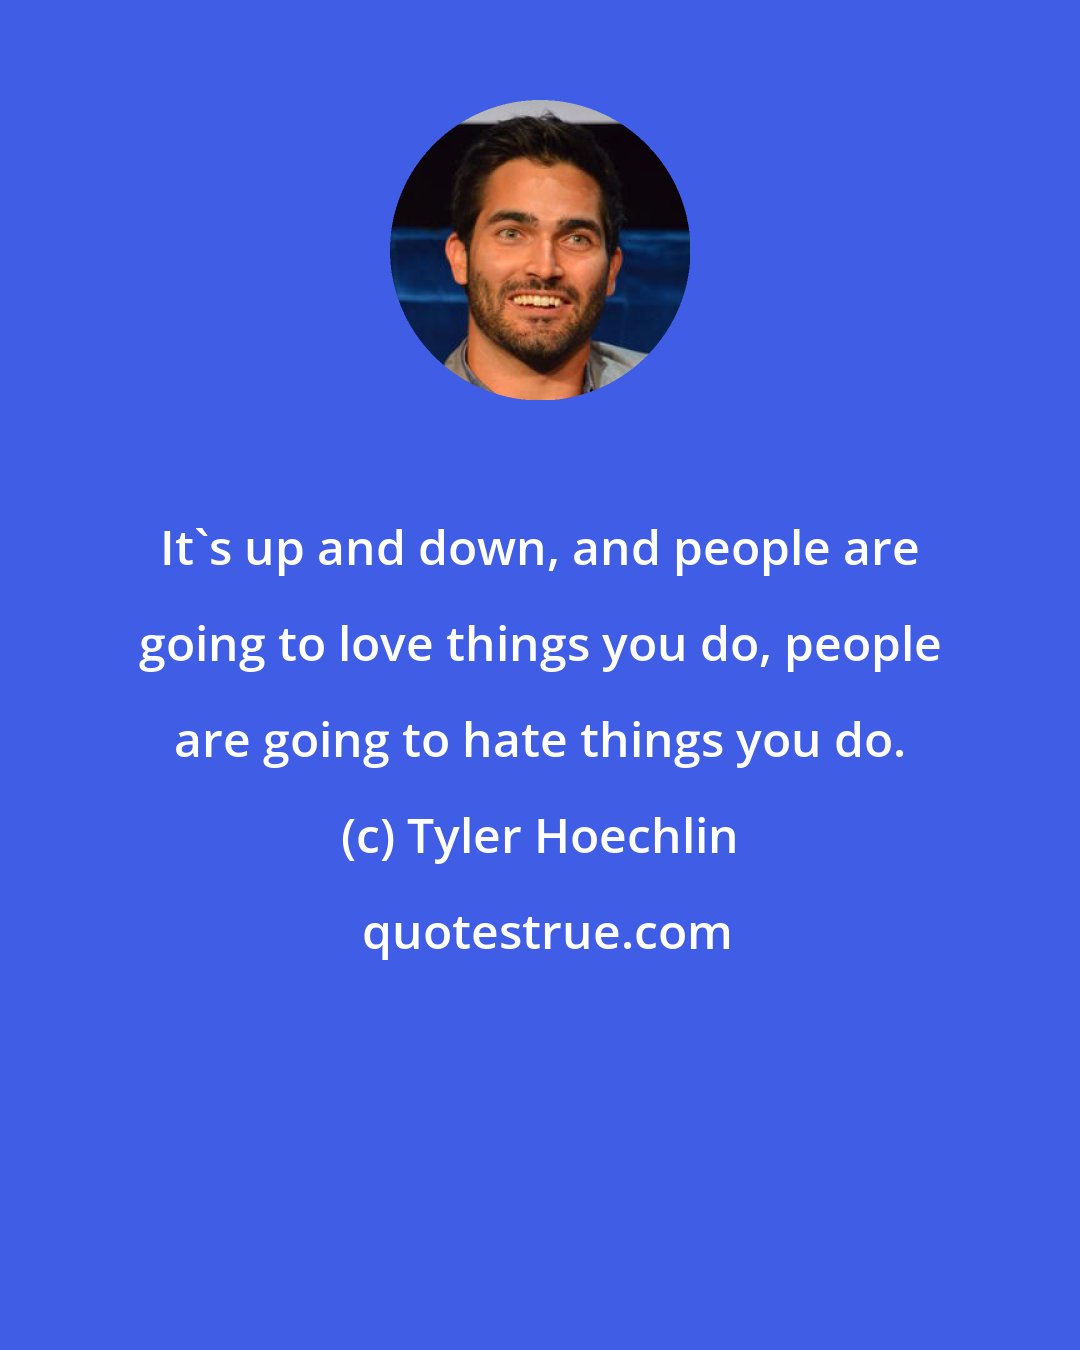 Tyler Hoechlin: It's up and down, and people are going to love things you do, people are going to hate things you do.